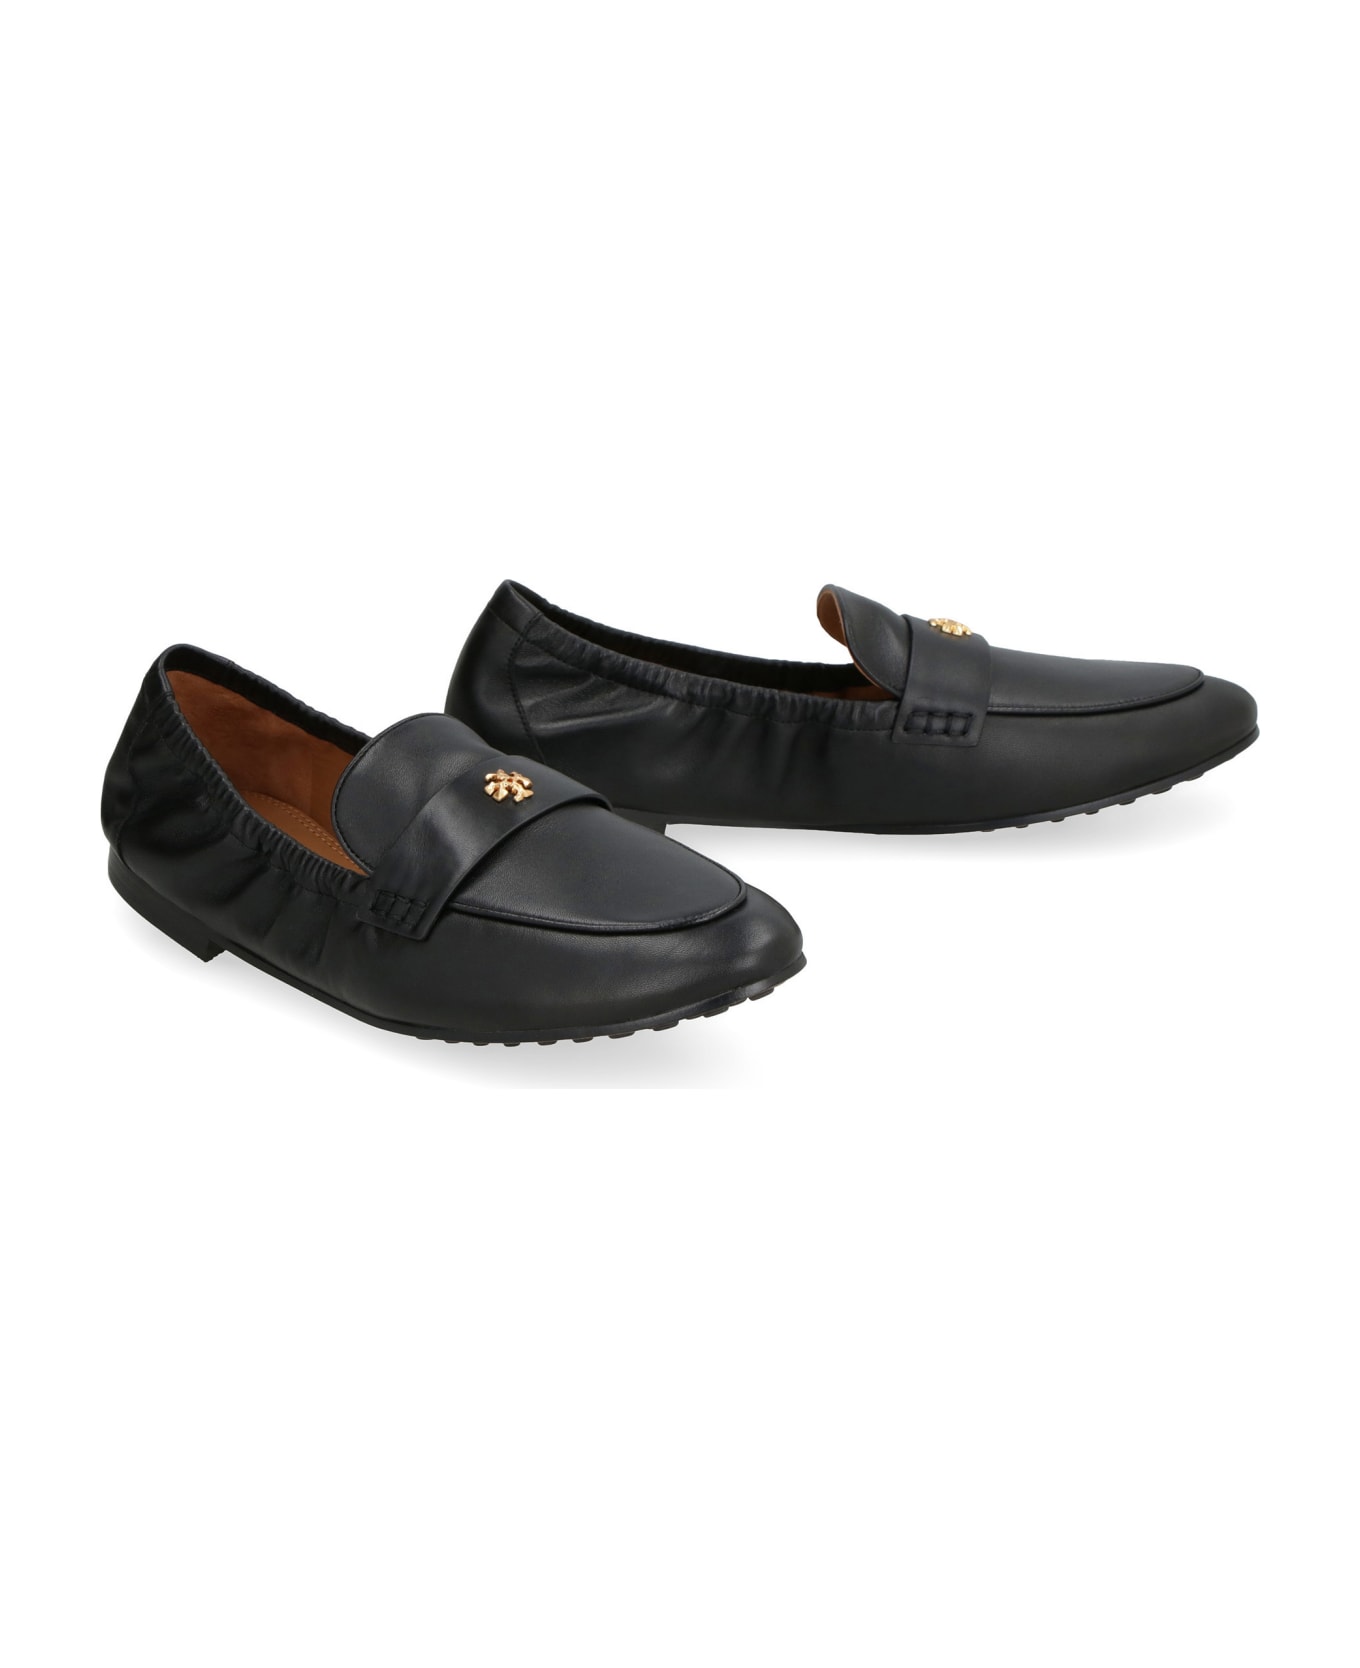 Tory Burch Leather Ballet Loafer - black